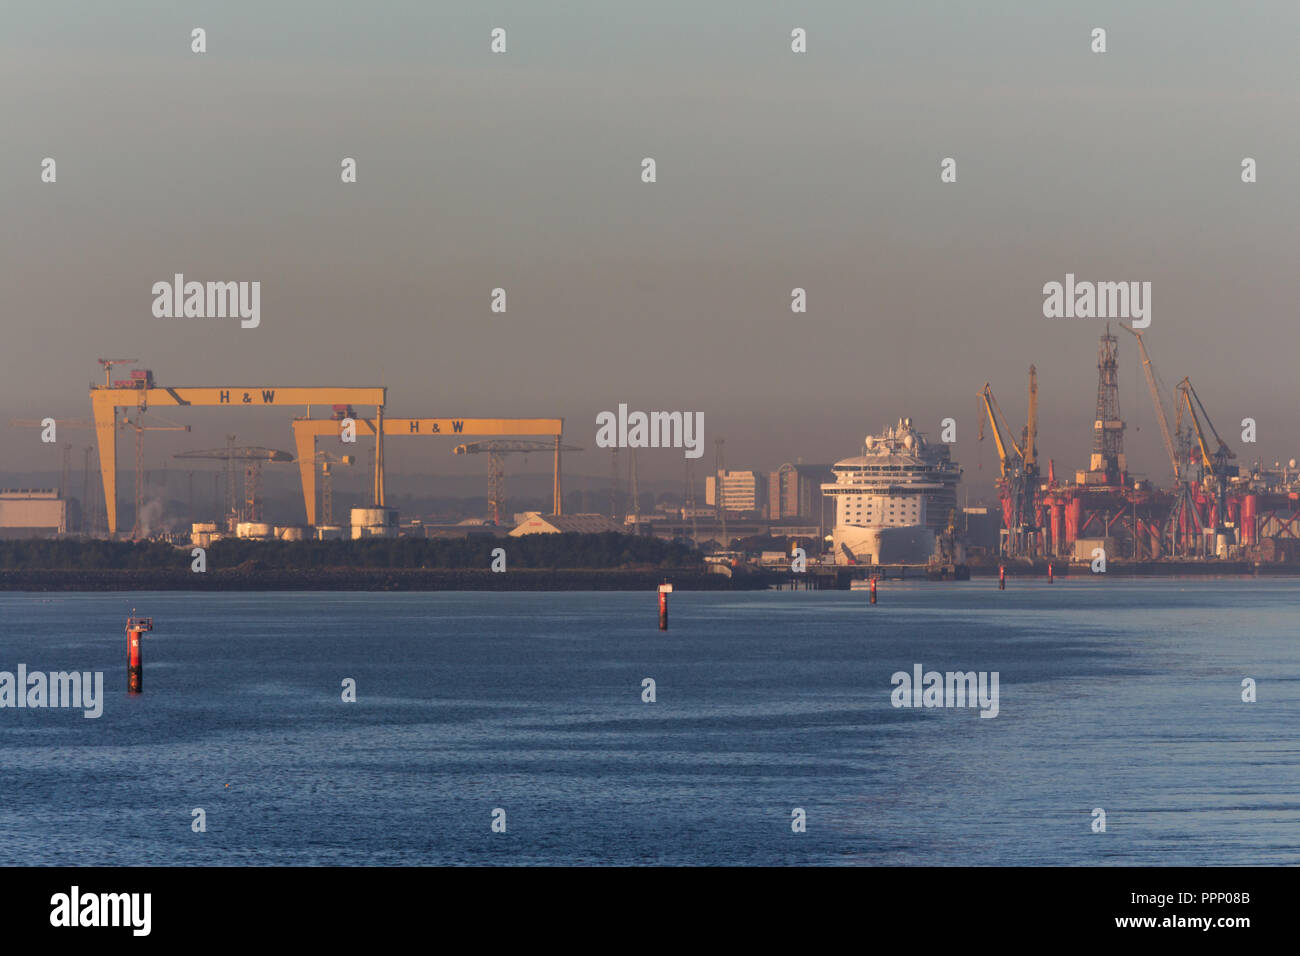 Early morning misty view of Belfast docks, cruise liner and Harland & Wolff shipbuilding cranes, Samson and Goliath. Belfast Lough, N.Ireland. Stock Photo